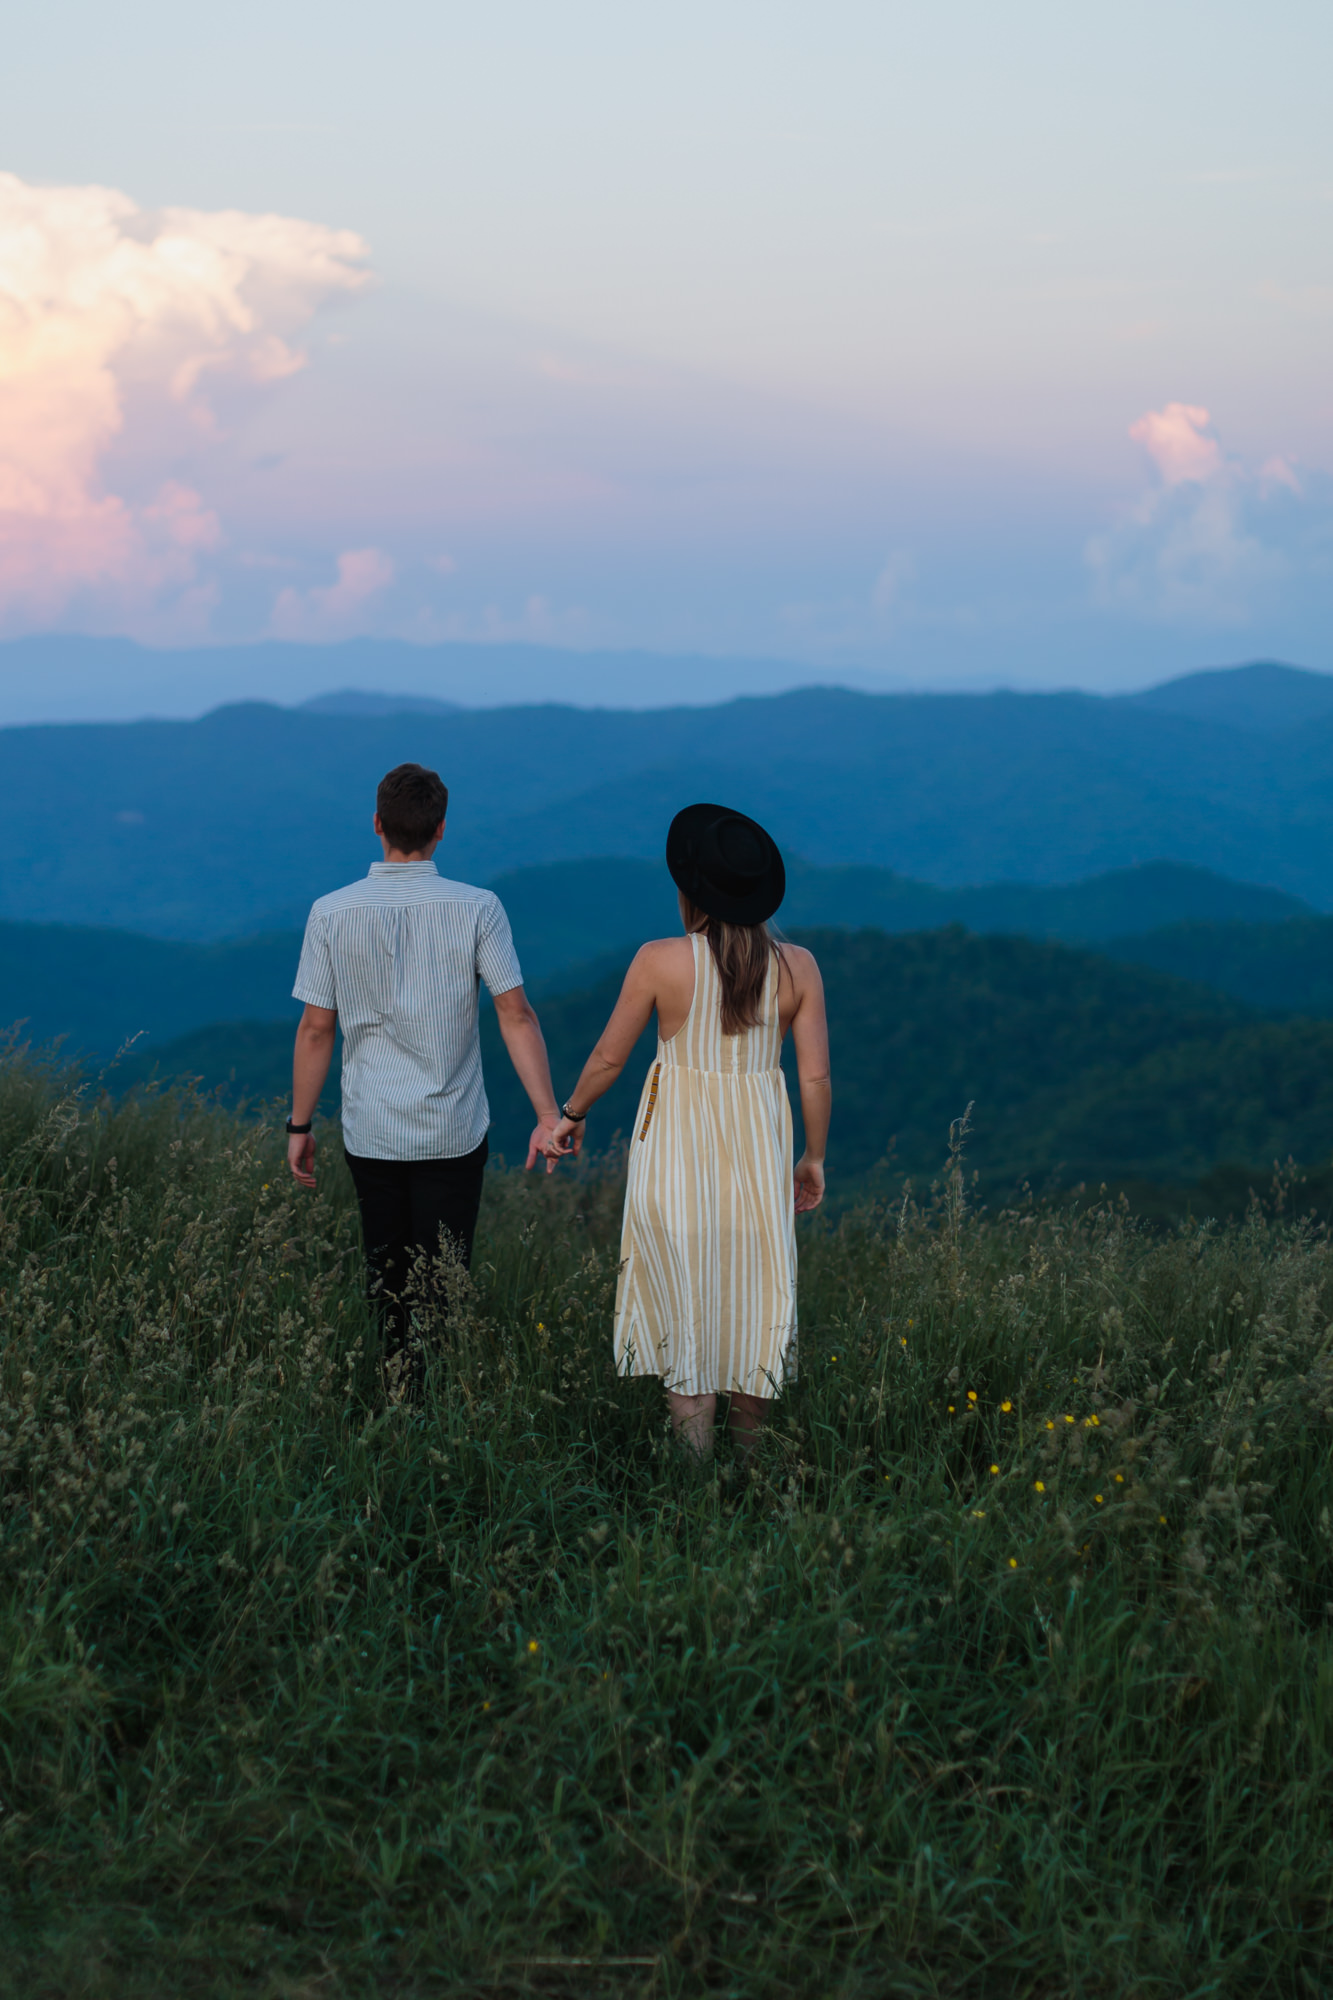 couple holding hands looking out at mountain sunset, Nashville engagement, couples mountain, mountain engagement, couples camping, dog photography, Knoxville, couples hiking, camping with dog, North Carolina hiking, summer engagement photos, Tennessee Photography, Tennessee Photographer, Tennessee Photos, Tennessee Engagement Photography, Tennessee Engagement Photos, Tennessee Engagement Photographer, Tennessee Portrait Photographer, Nashville Engagement Photographer, Nashville Engagement Photos, Knoxville Engagement, Nashville Lifestyle Photographer, Nashville Lifestyle Photography, Nashville Lifestyle Photos, Creative Portraits